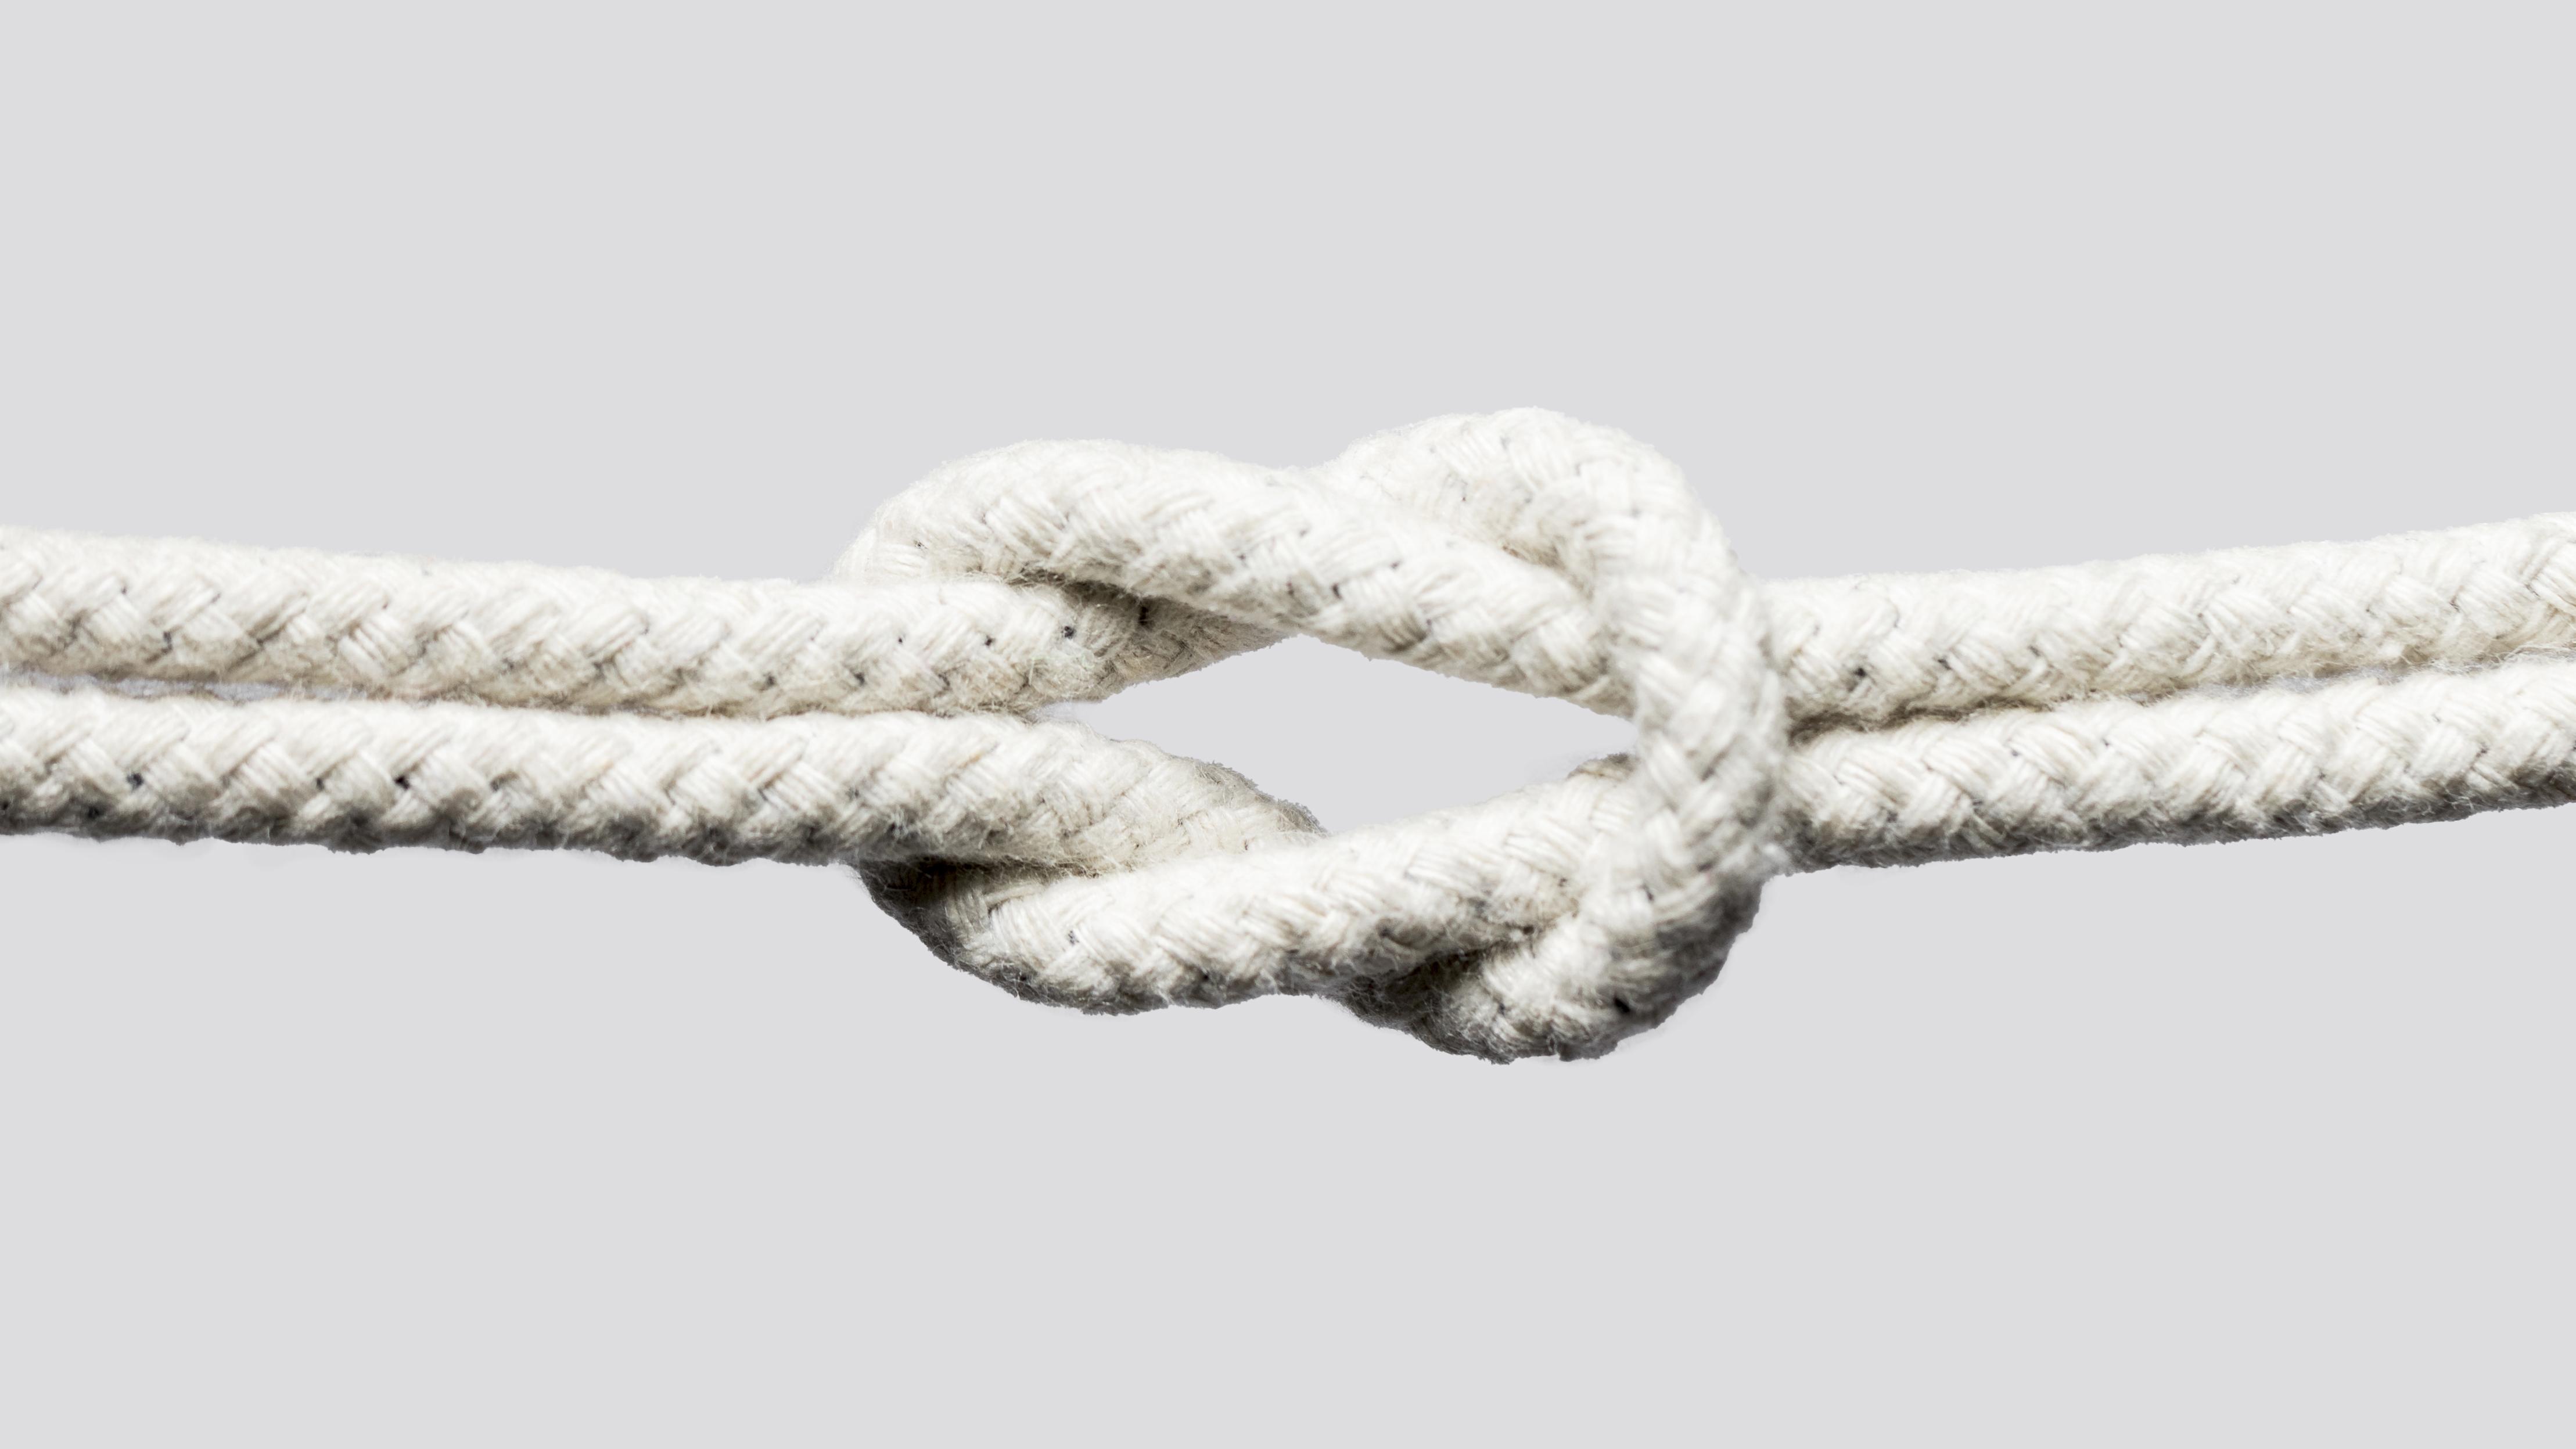 https://www.fibercord.es/wp-content/uploads/2021/12/ship-white-ropes-knot-isolated-on-white-background.jpg